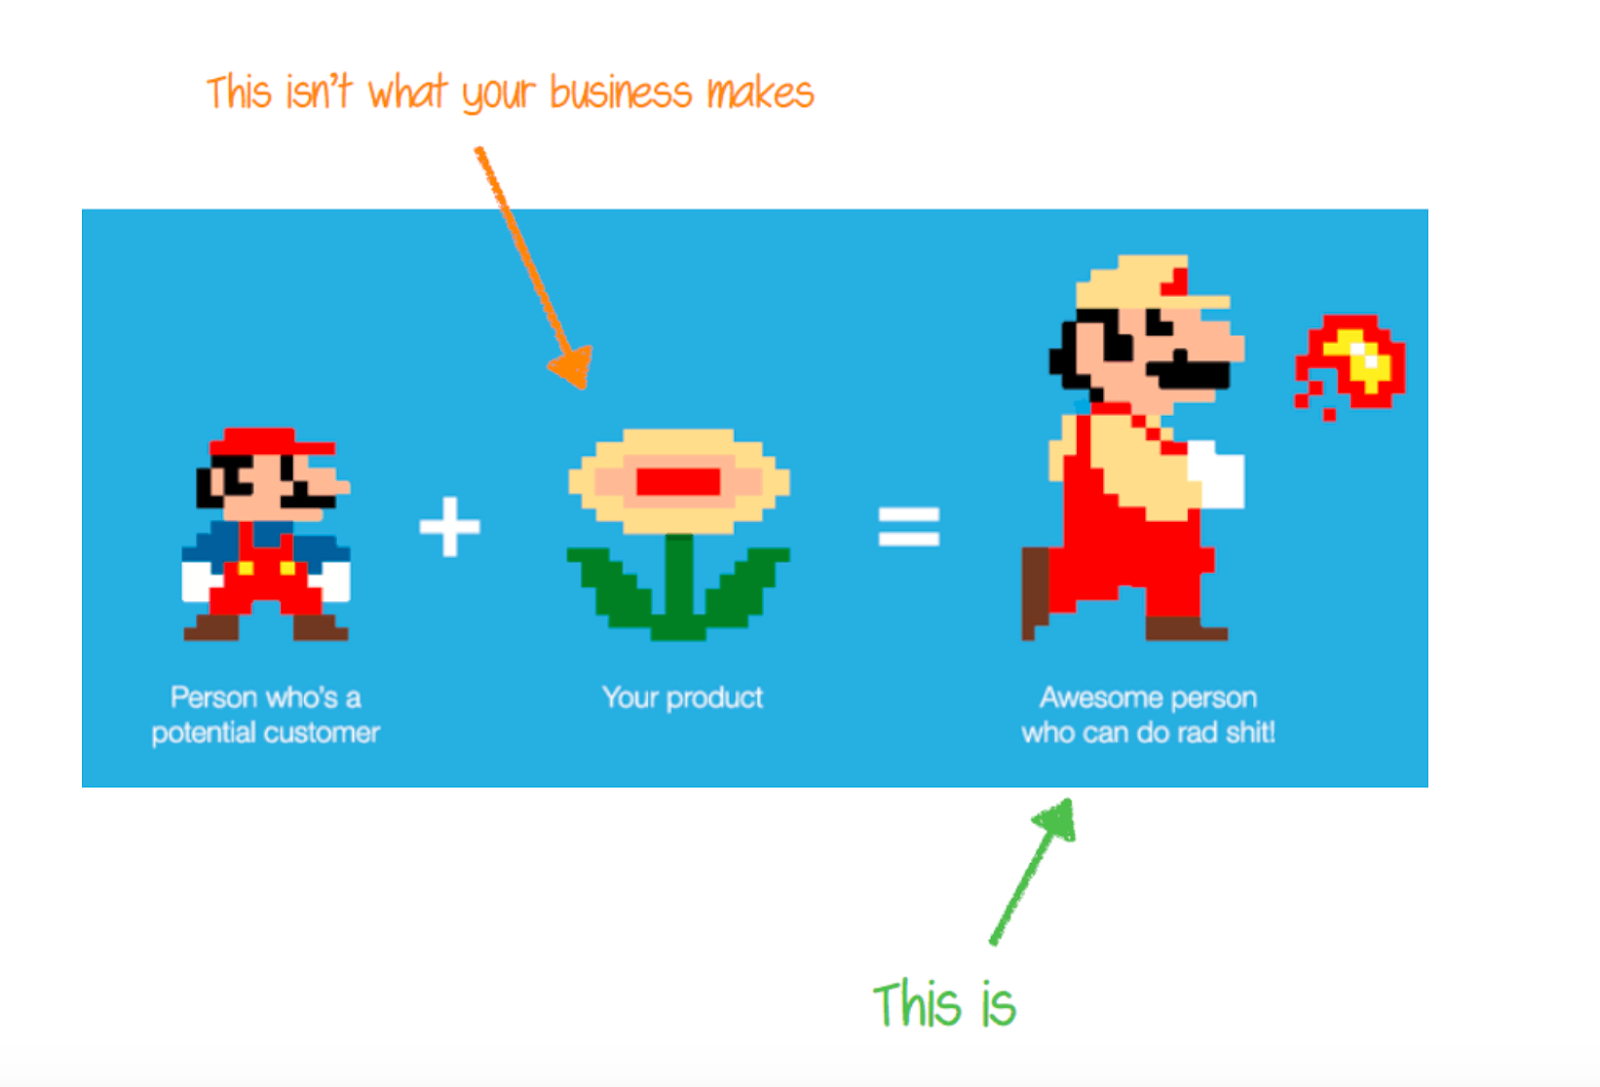 example of the flower in Super Mario brothers for a B2B customer acquisition strategy